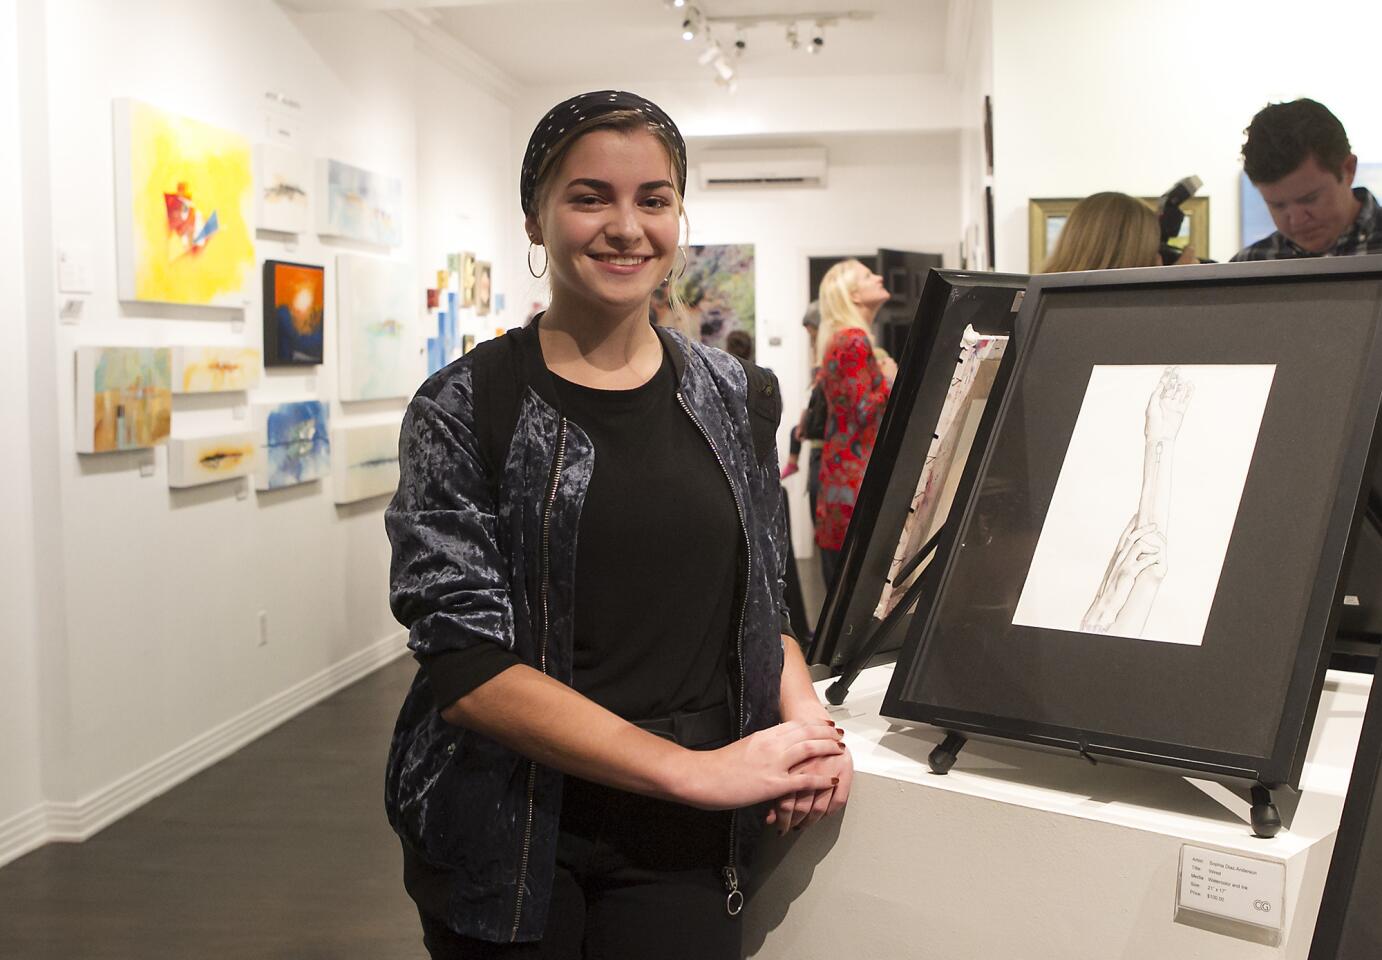 LB Art Students Learn Art Business at Cove Gallery